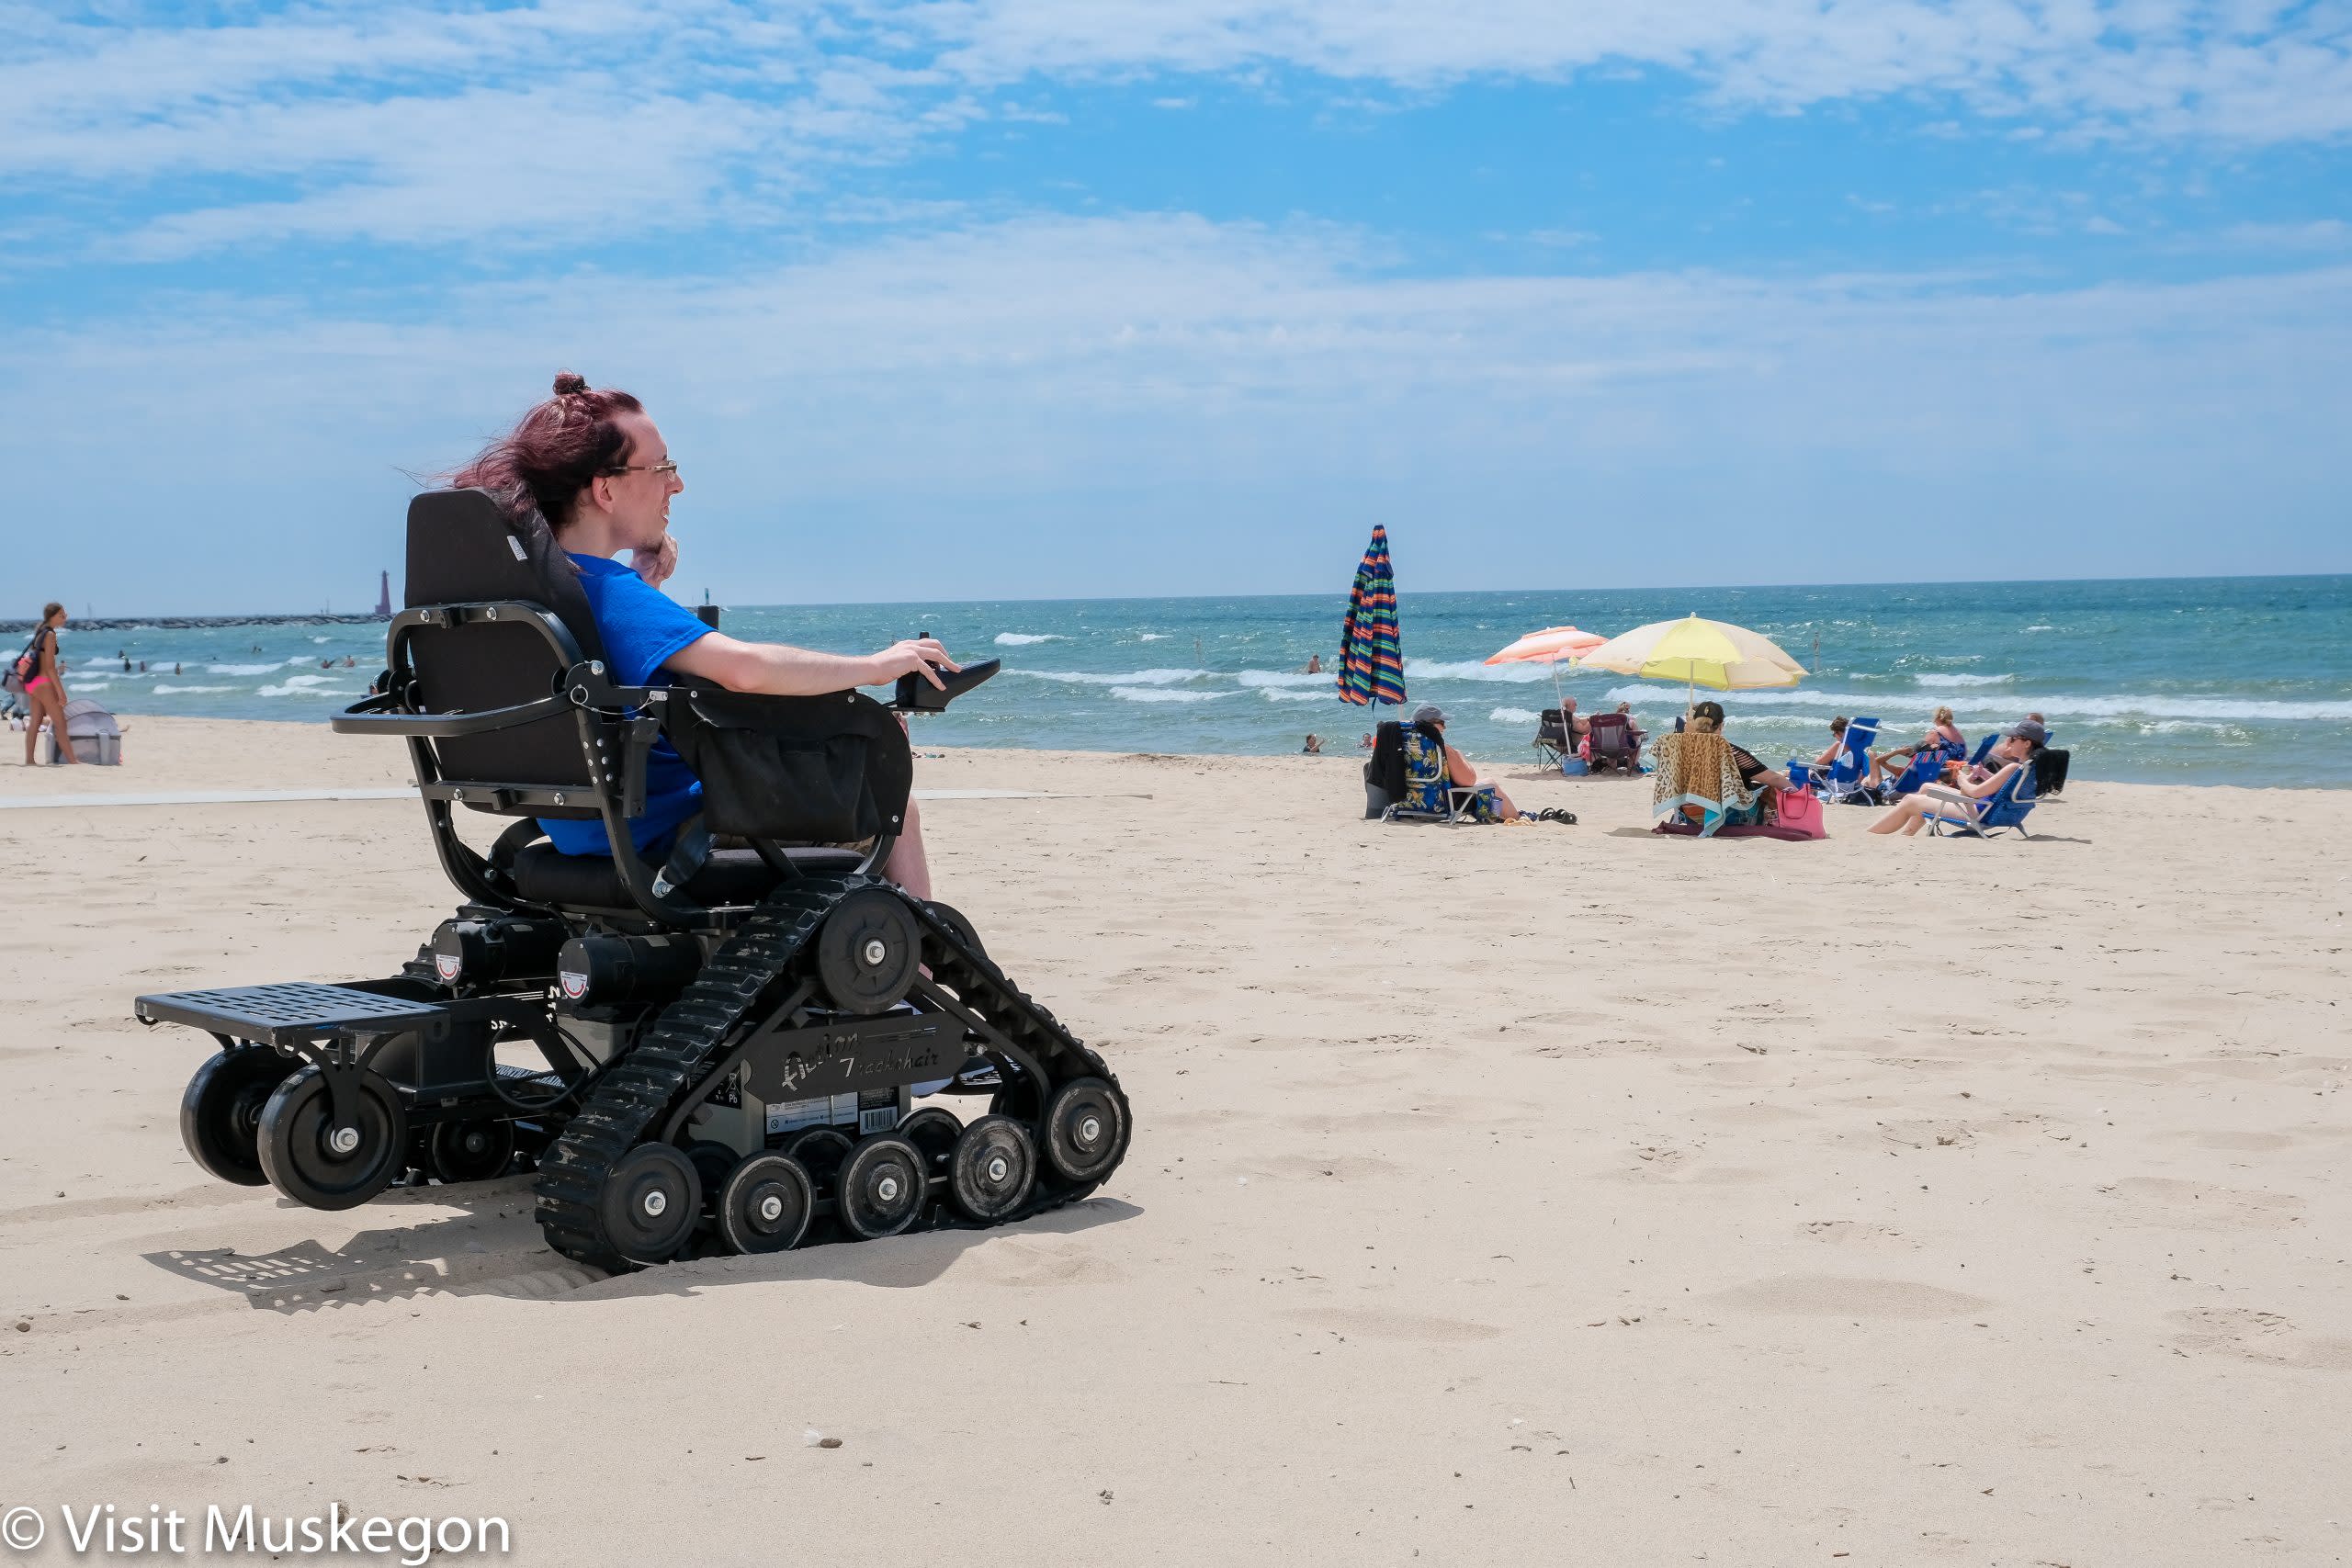 Young man in TrackChair on the beach looks out over Lake Michigan. Beach goers and bright umbrellas are on the shoreline. 